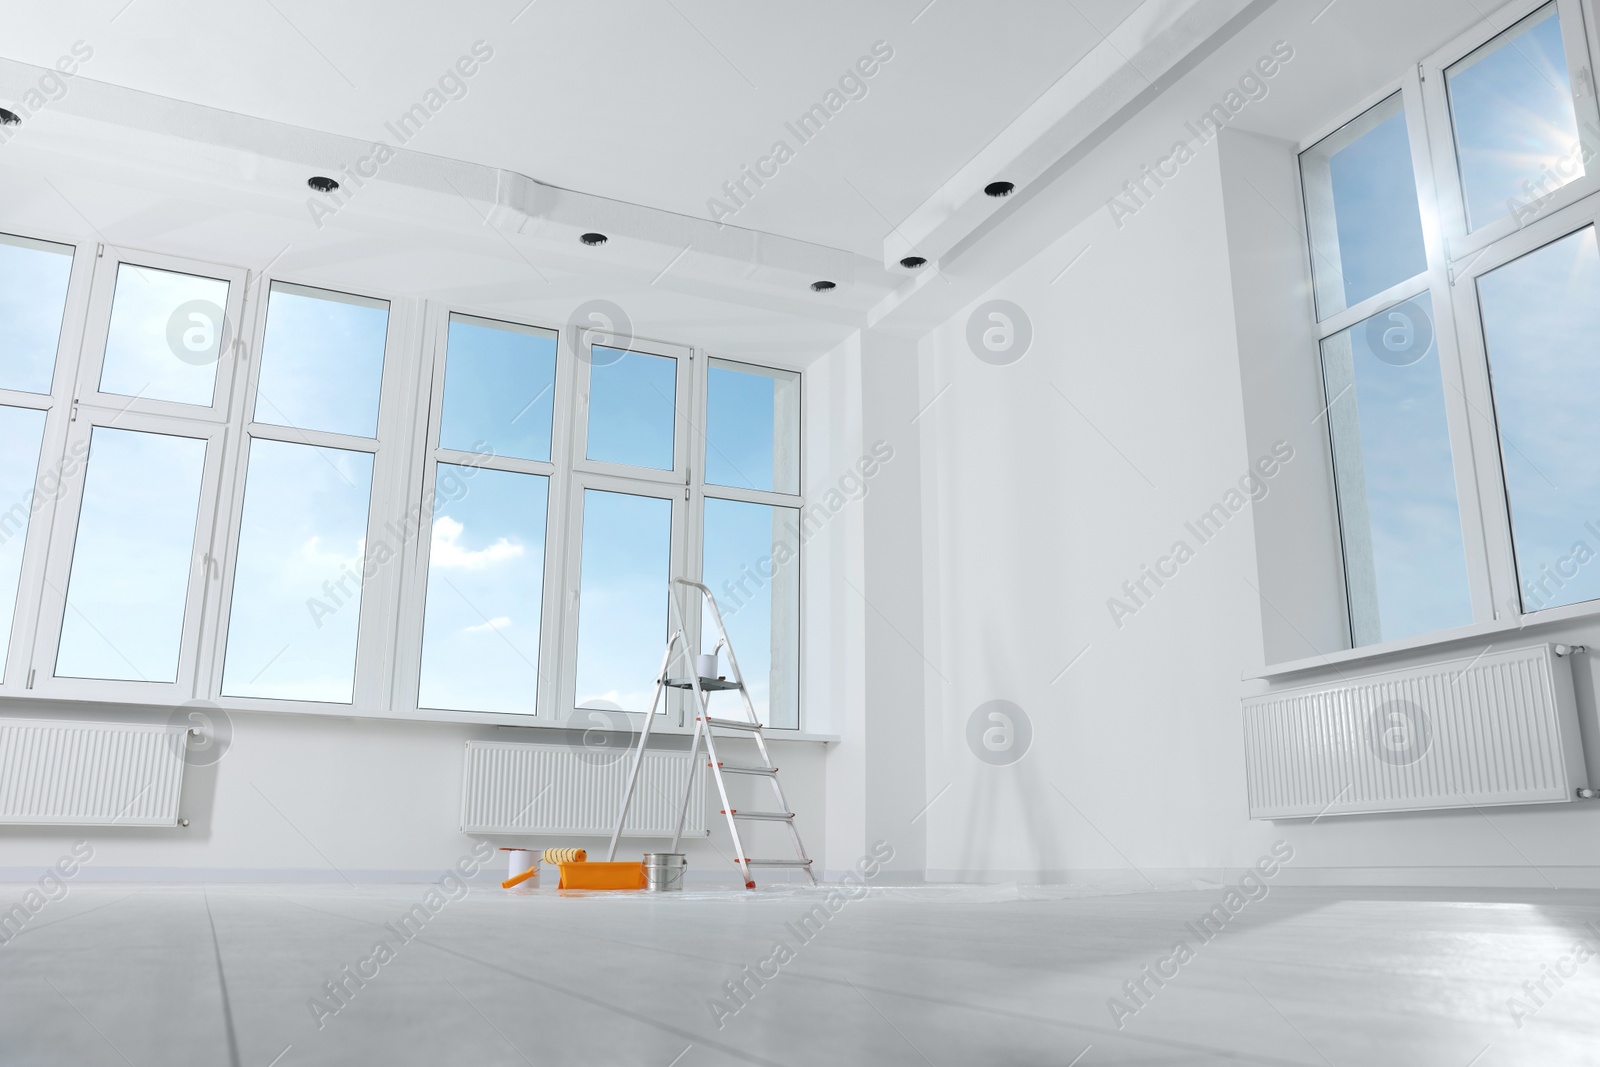 Photo of Stepladder and painting tools near window in empty room, space for text